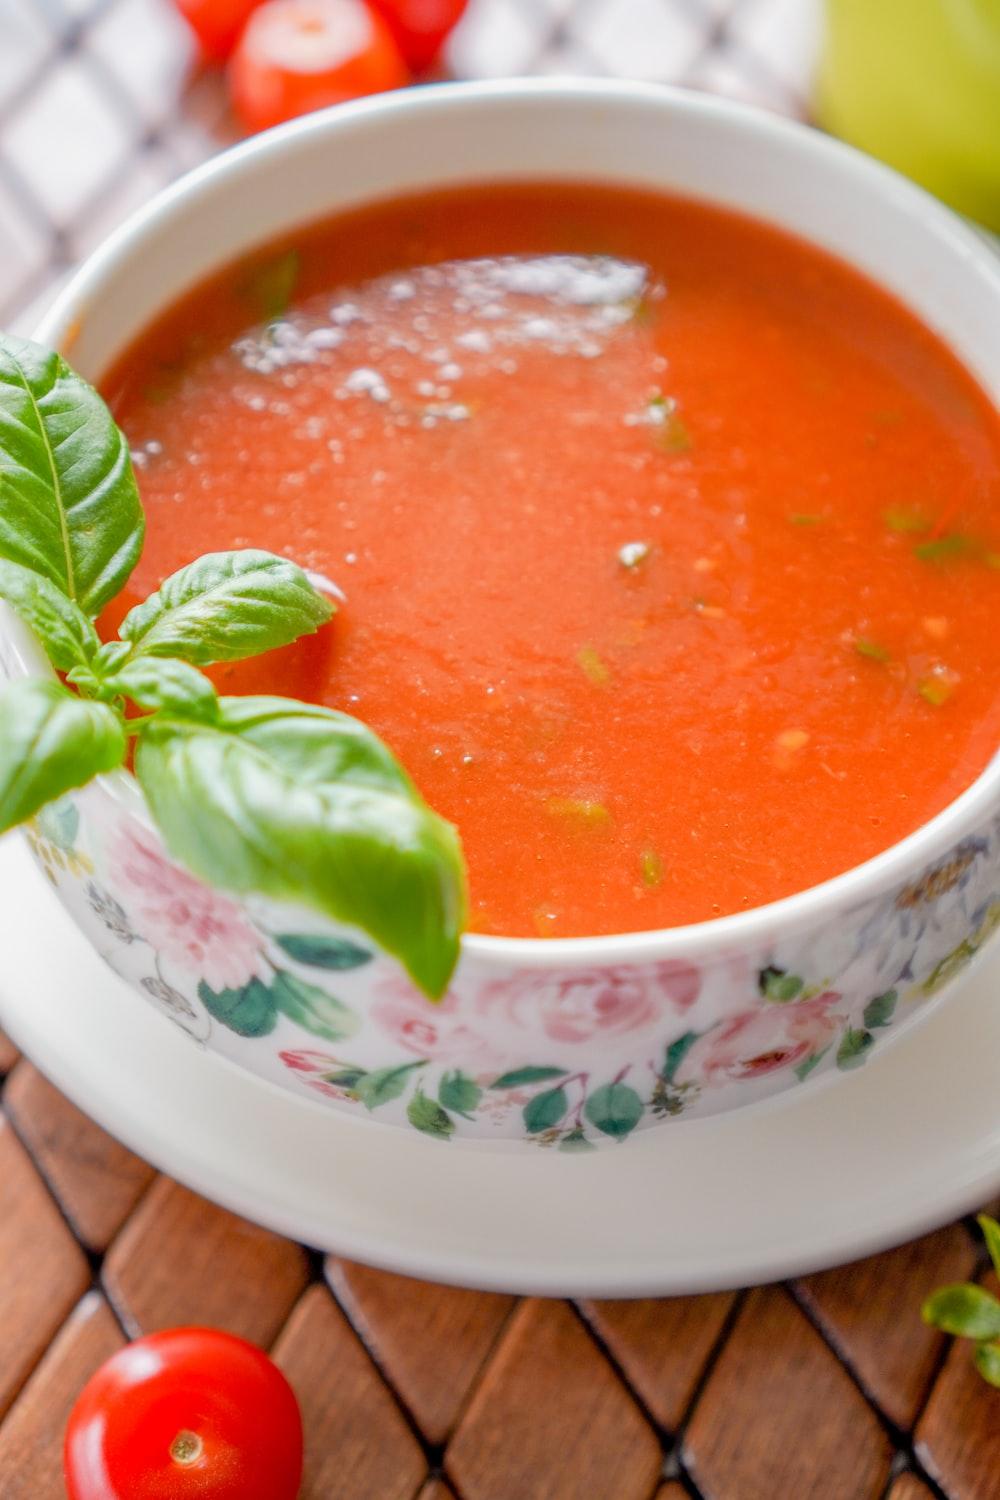 The Real Food Academy Miami's tomato soup recipe.